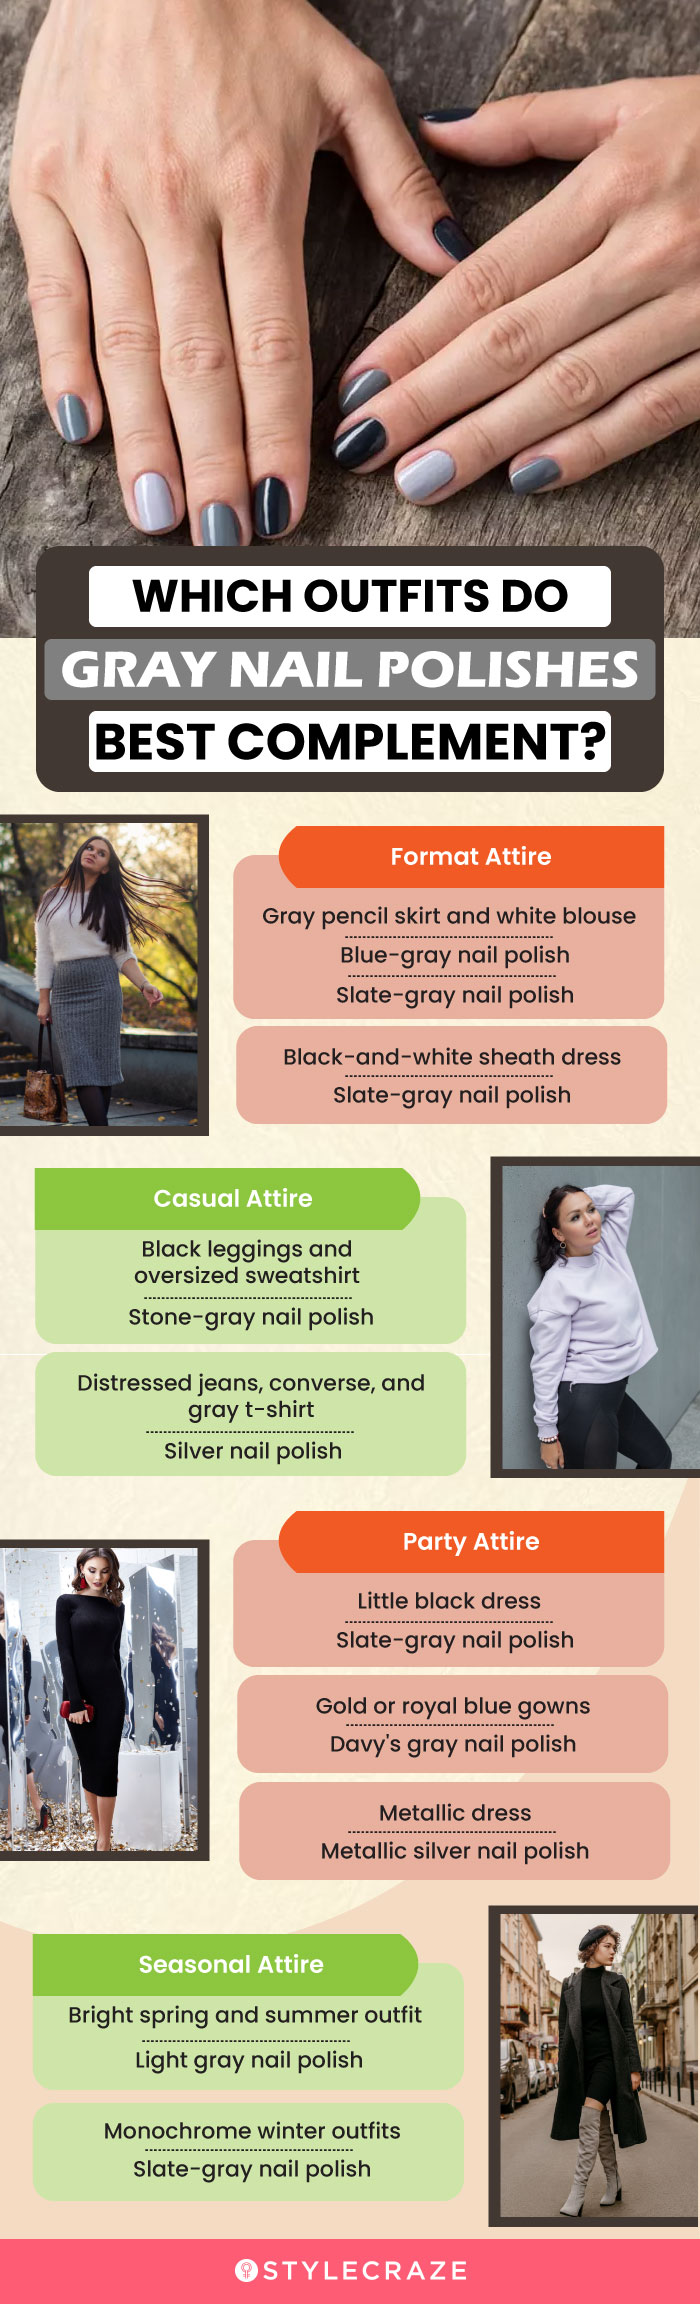 Which Outfits Do Gray Nail Polishes Best Complement? (infographic)